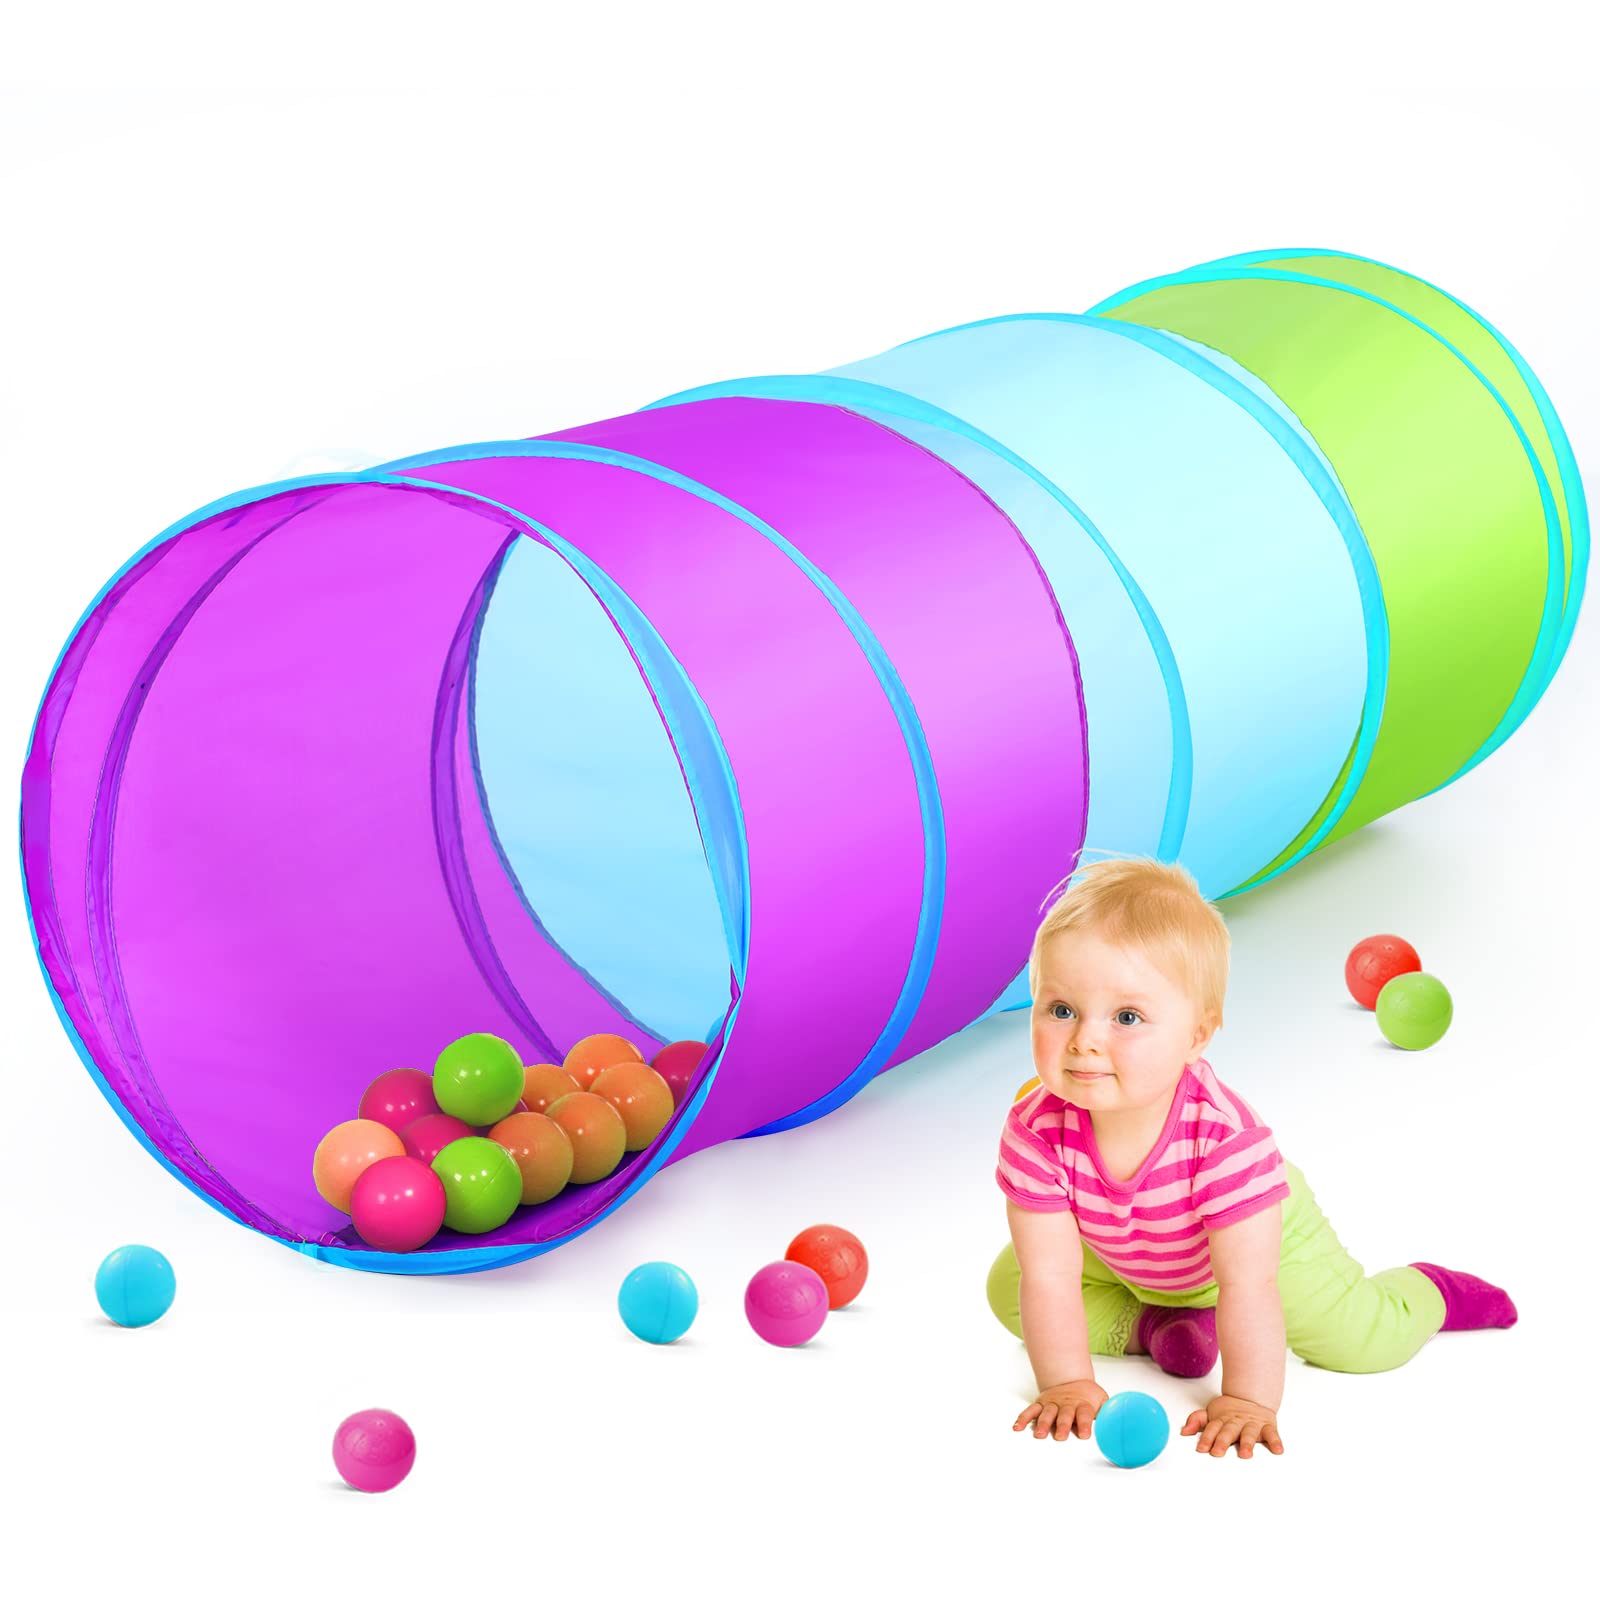 Moncoland Kids Play Tunnel Tent For Toddlers, Colorful Pop Up Crawl Toy Baby Infant Children Or Dog Cat Pet, Collapsible Gift Bo